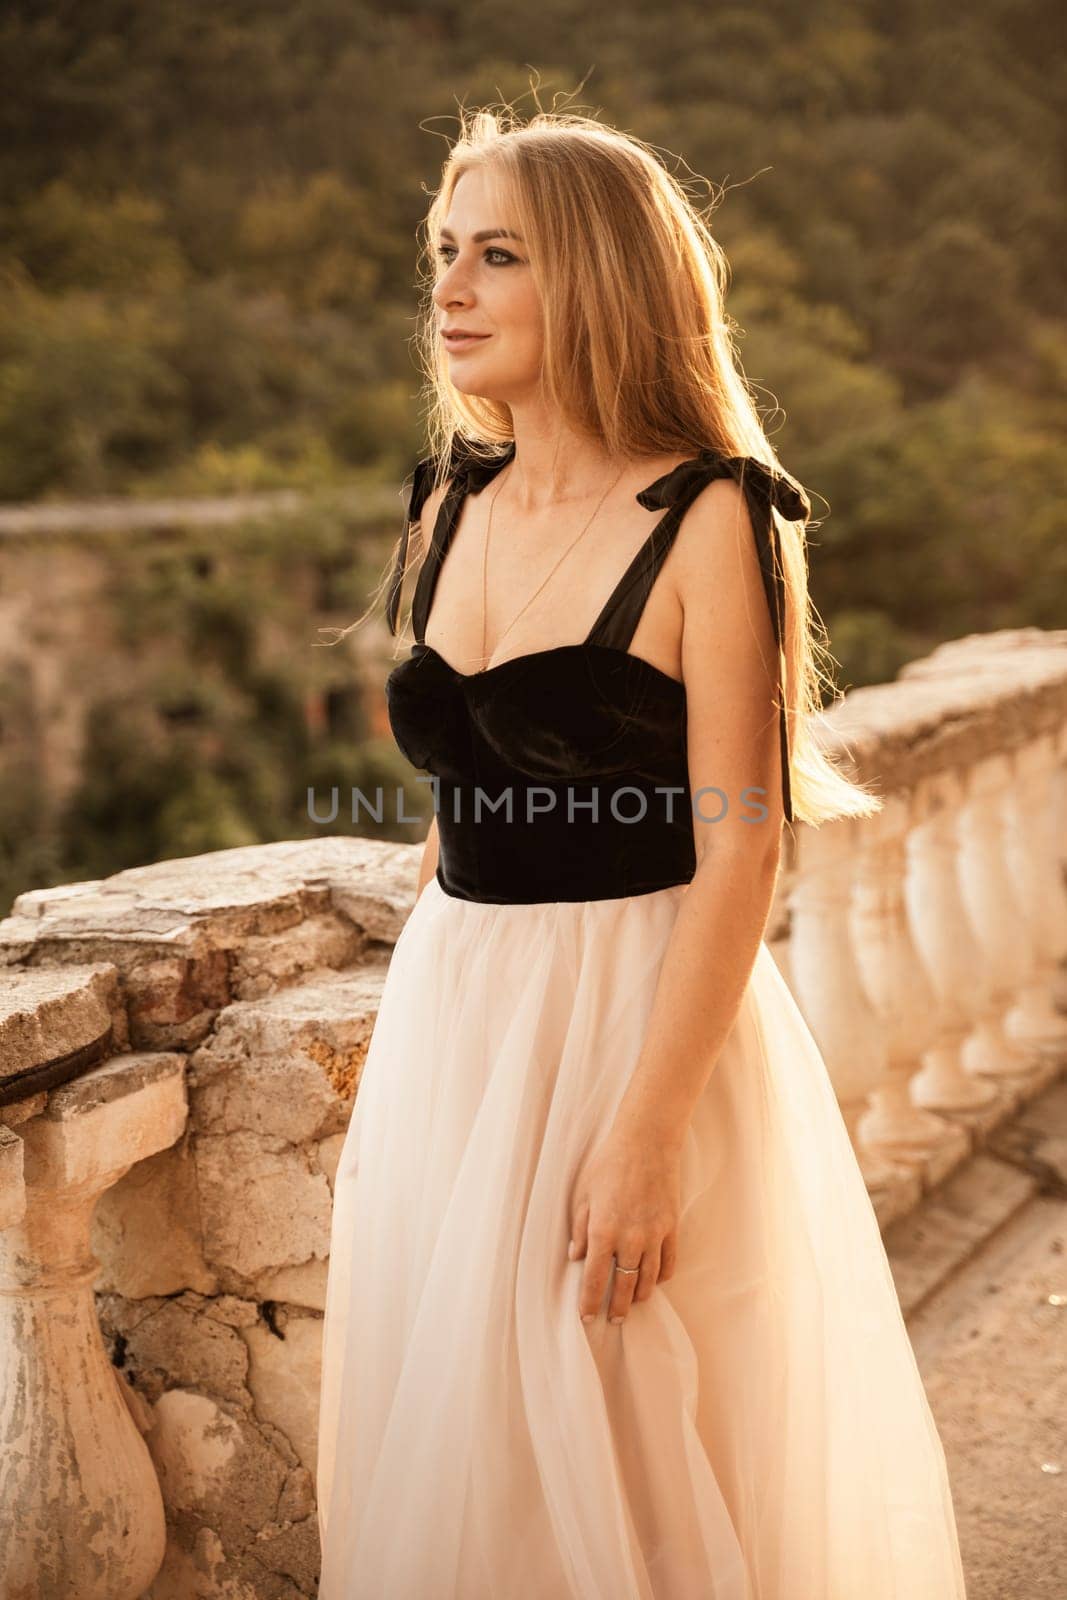 Blonde long hair, nature summer happy adult girl with long blond hair developing in the wind in nature. Dressed in a black top, white skirt. by Matiunina